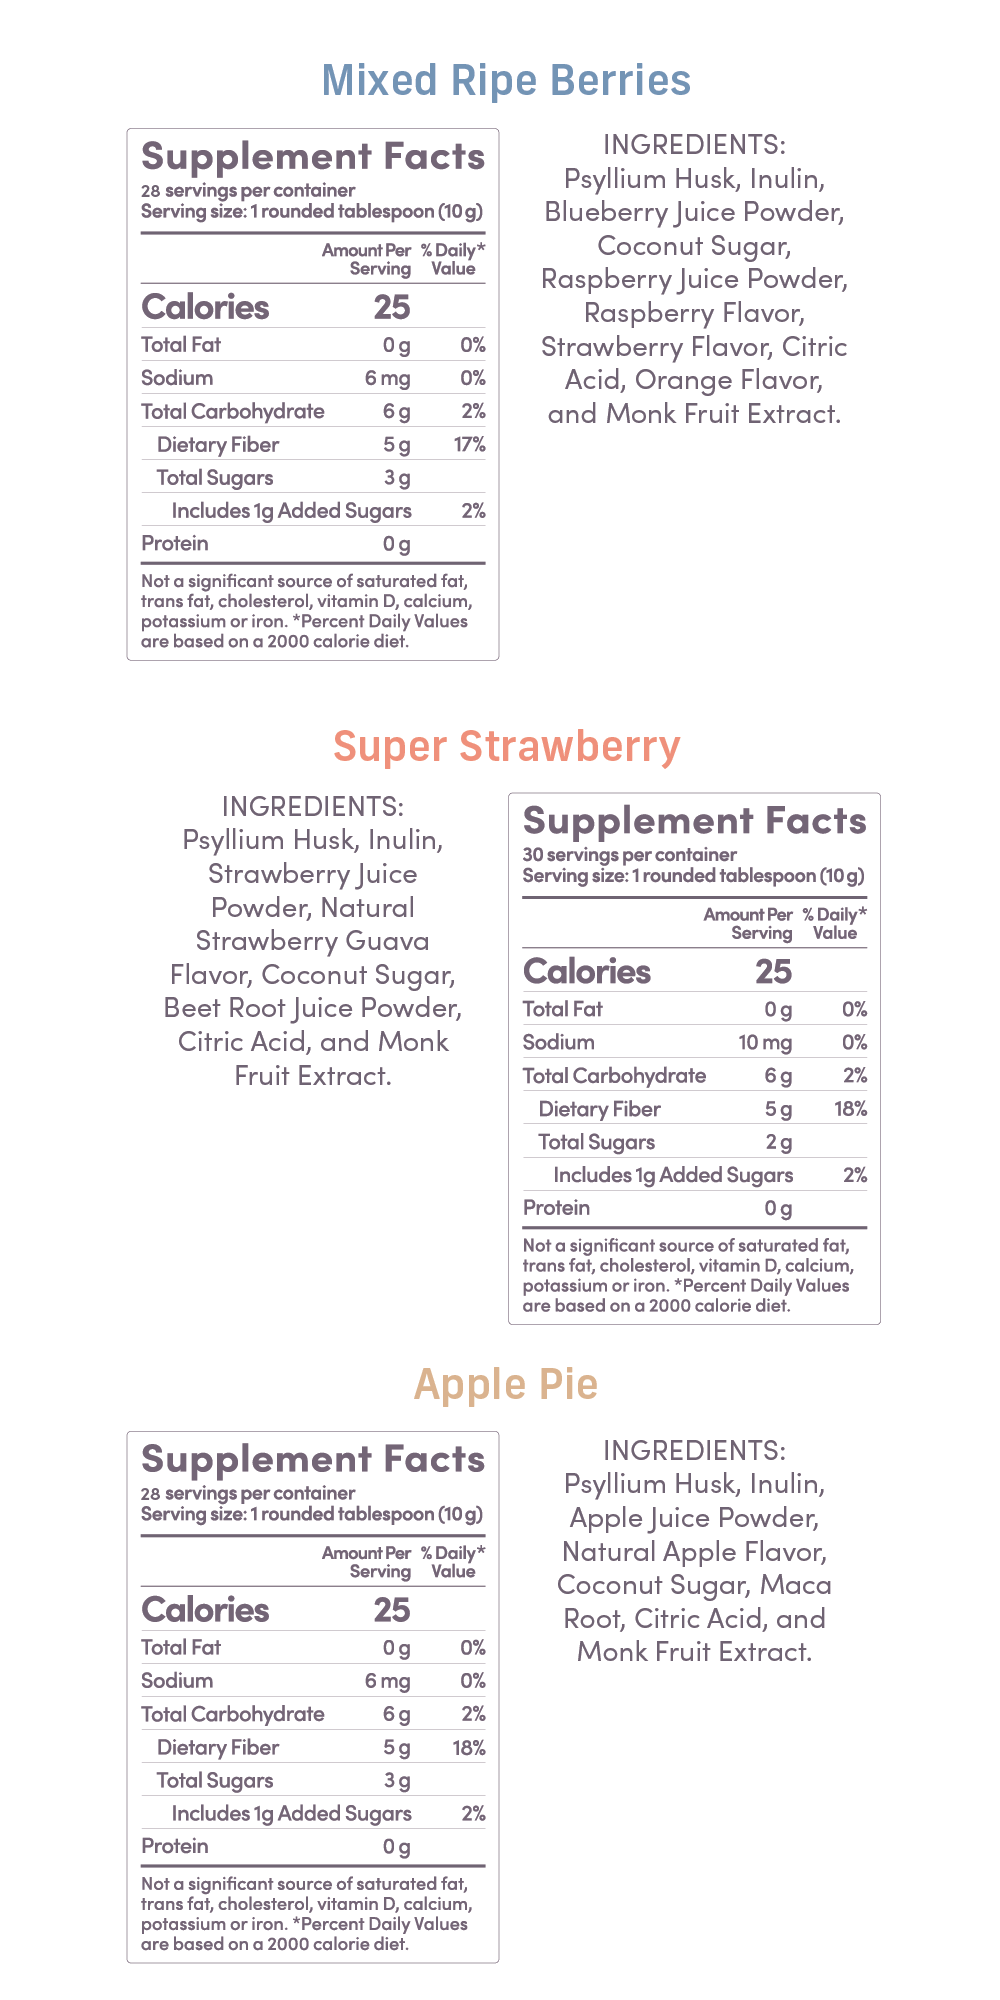 Bonny Supplements Facts for Apple Pie, Mixed Berries, and Strawberry